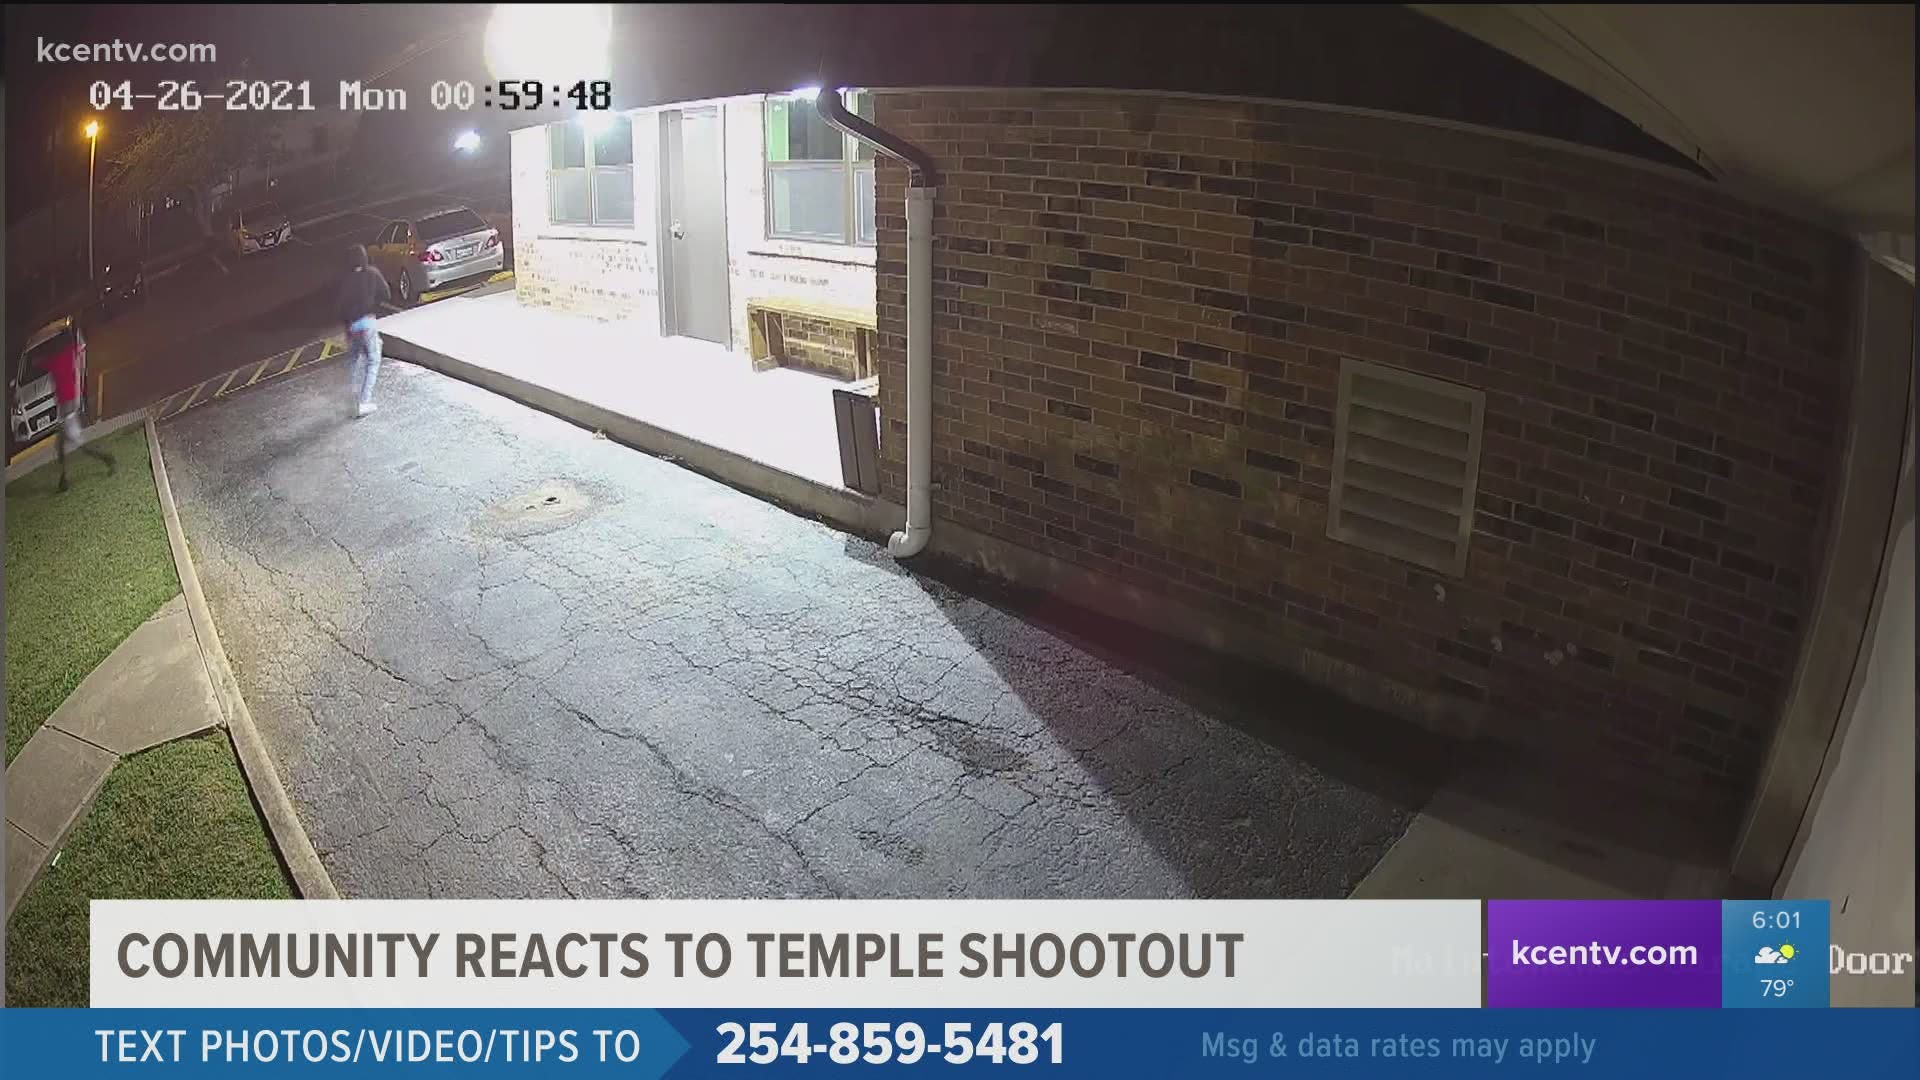 The brazen shootout was caught on camera leaving police searching for a handful of juveniles and young adults.